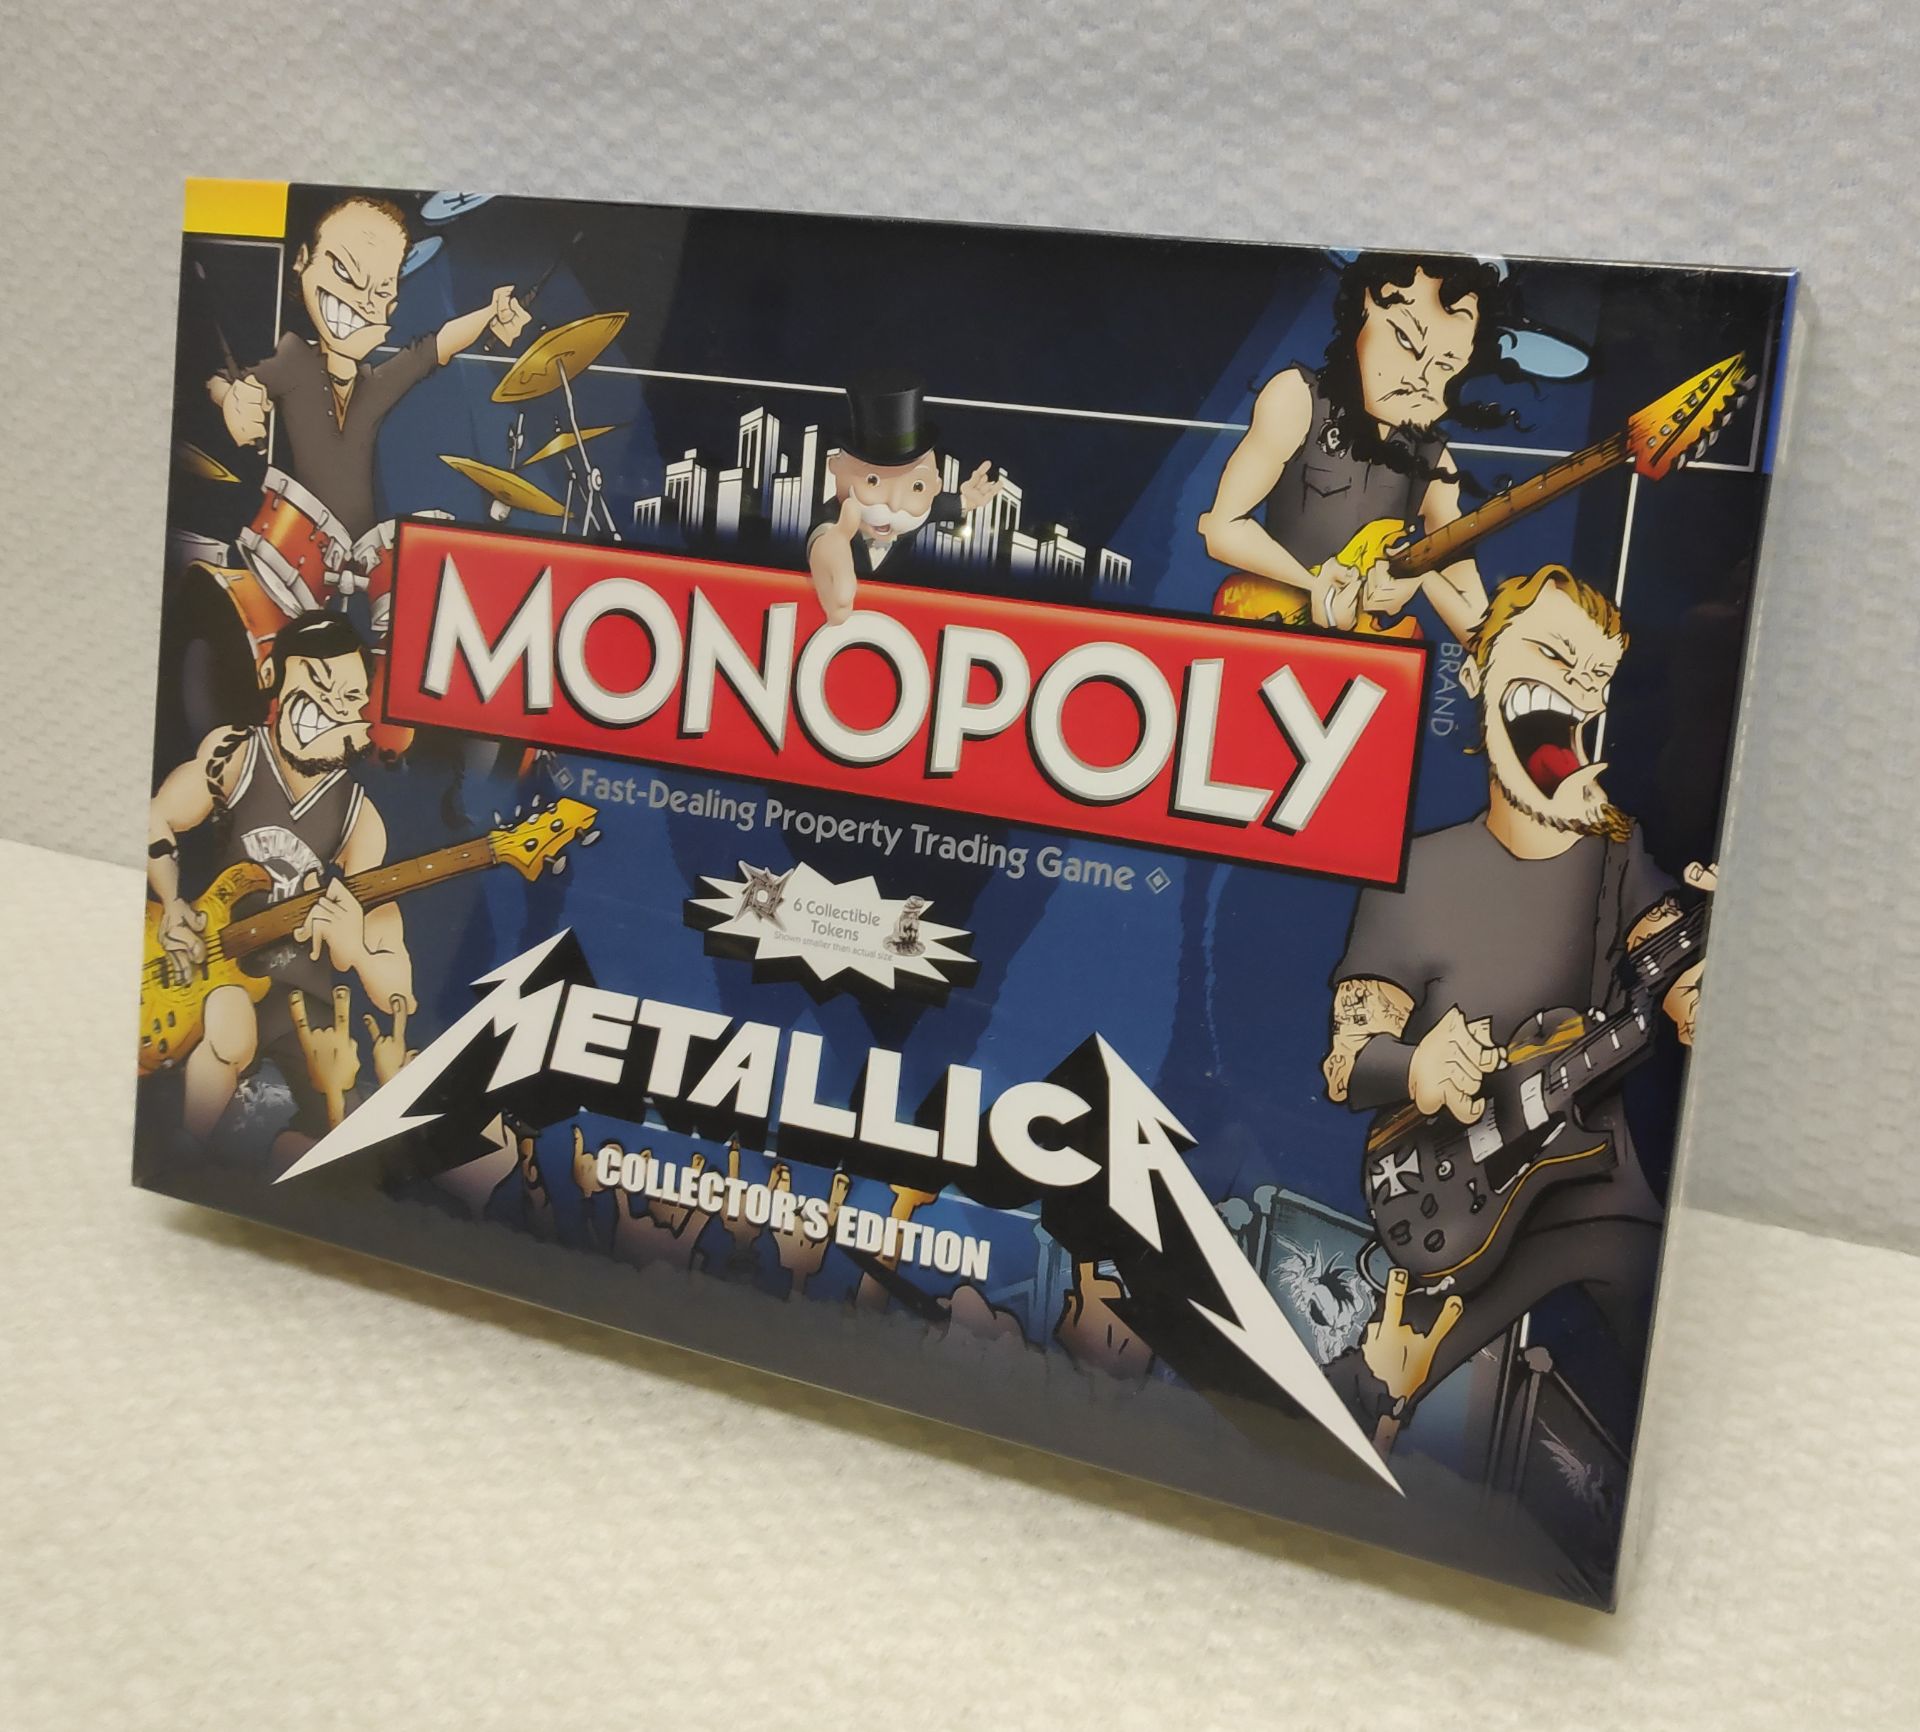 1 x Metallica Collector's Edition Monopoly - New/Sealed - CL720 - Location: Altrincham WA1 - Image 5 of 8